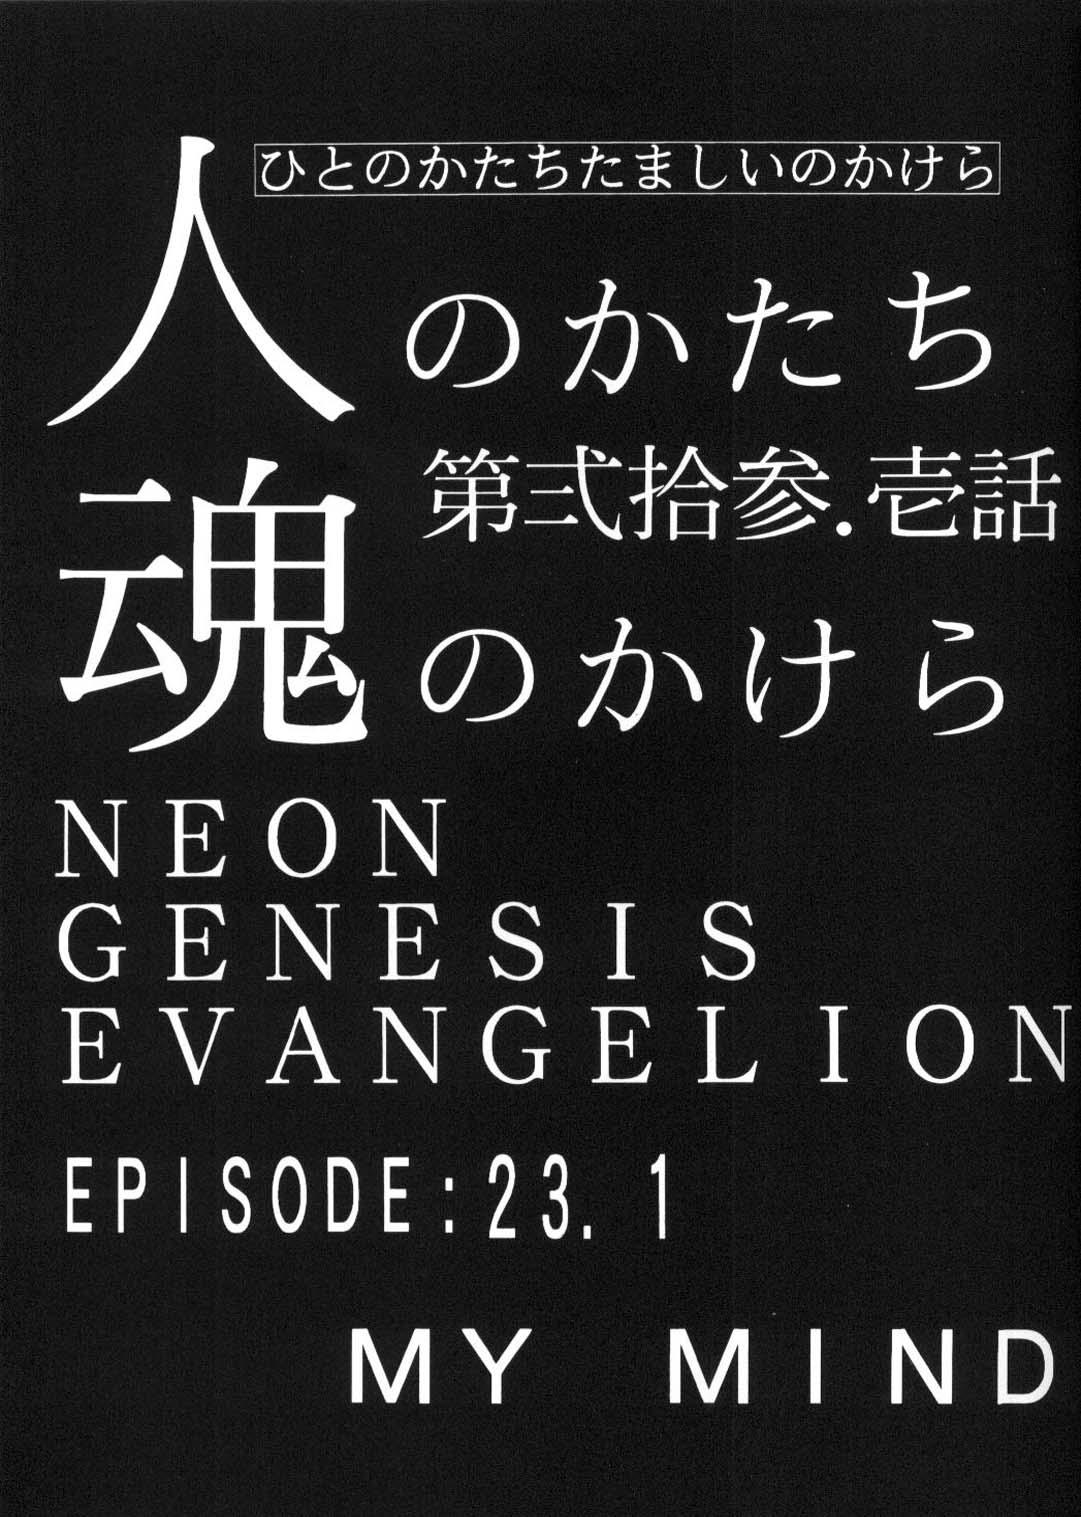 Hot Naked Women Expedia Ver 1.0A - Neon genesis evangelion Culona - Page 4